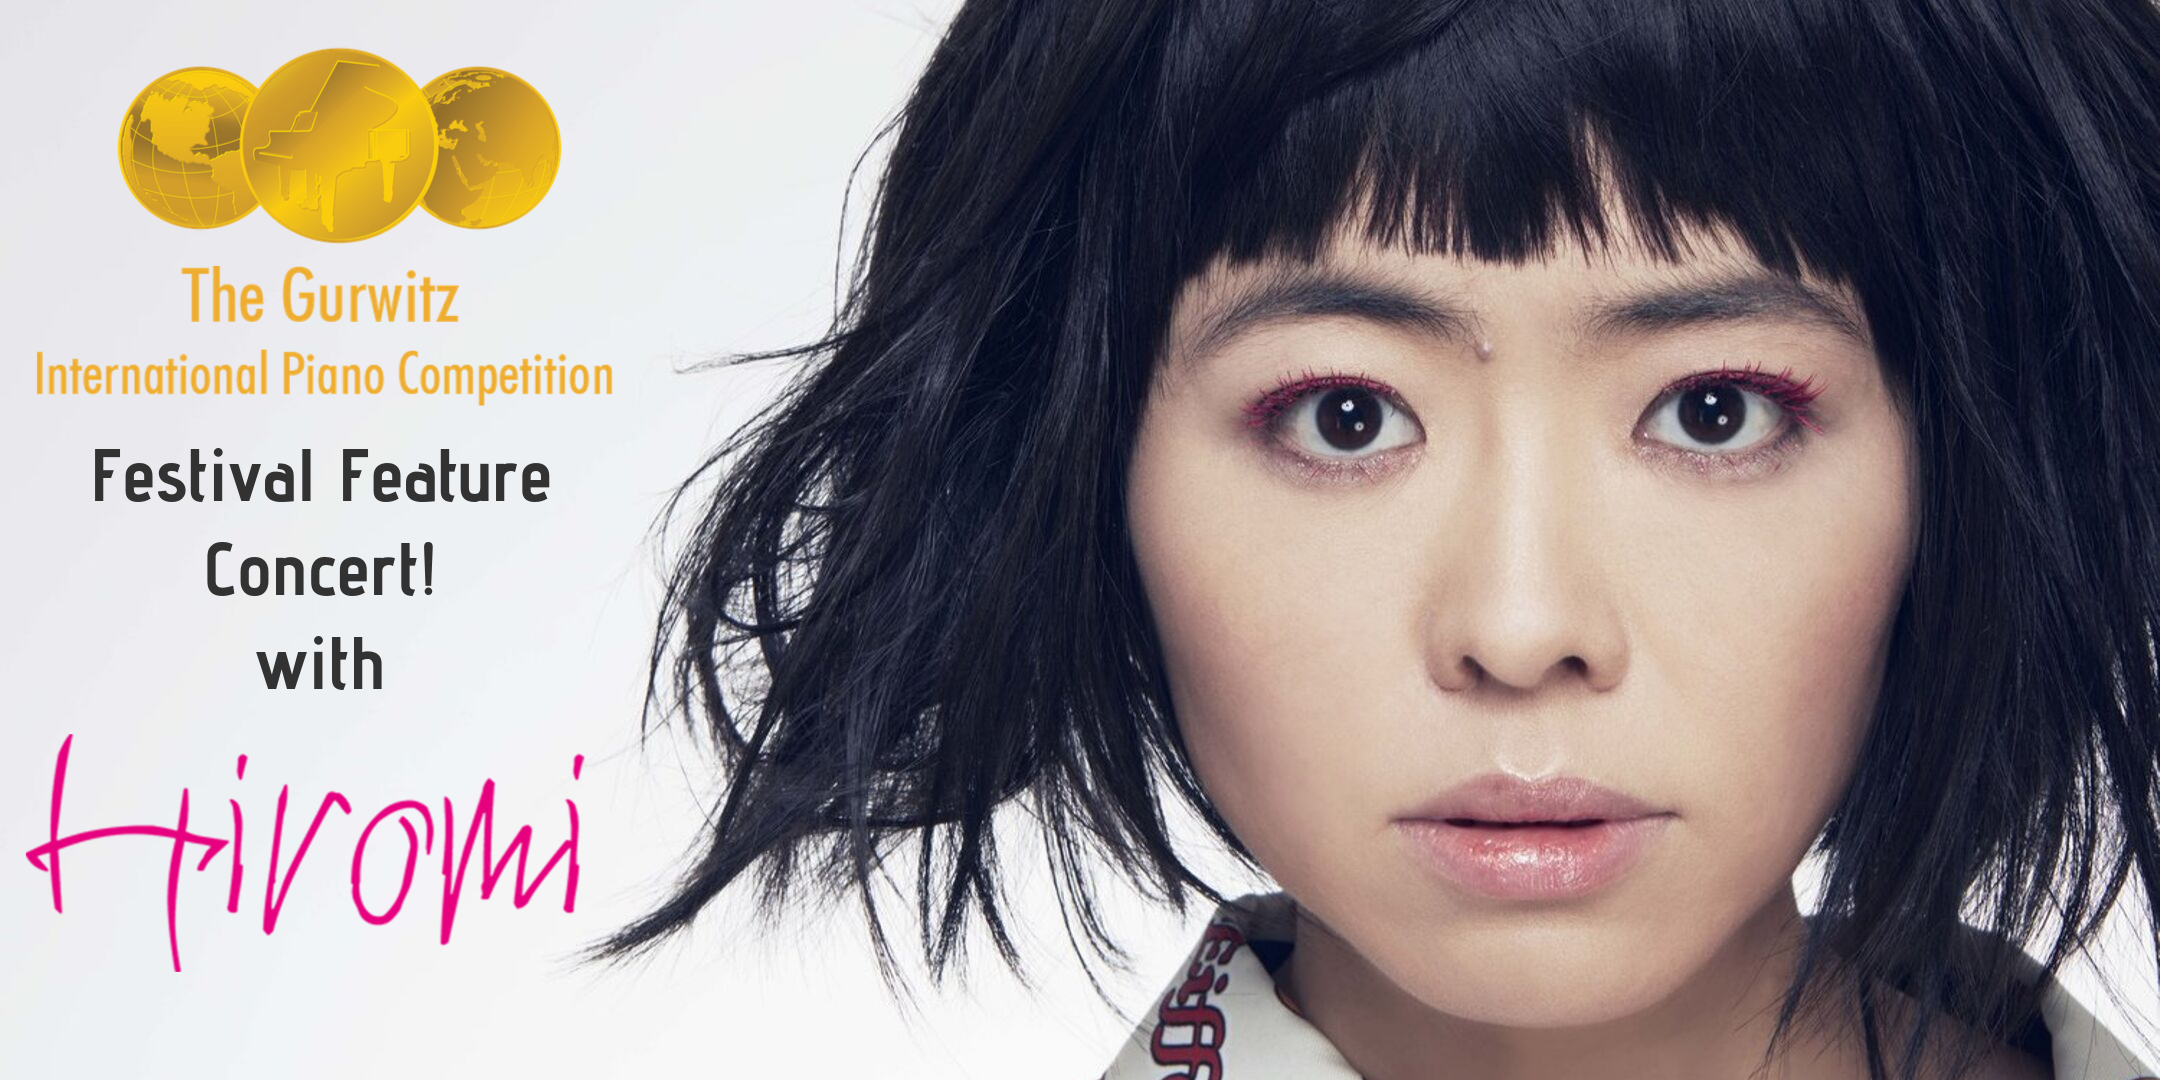 The Gurwitz Competition's Festival Feature Concert! featuring HIROMI